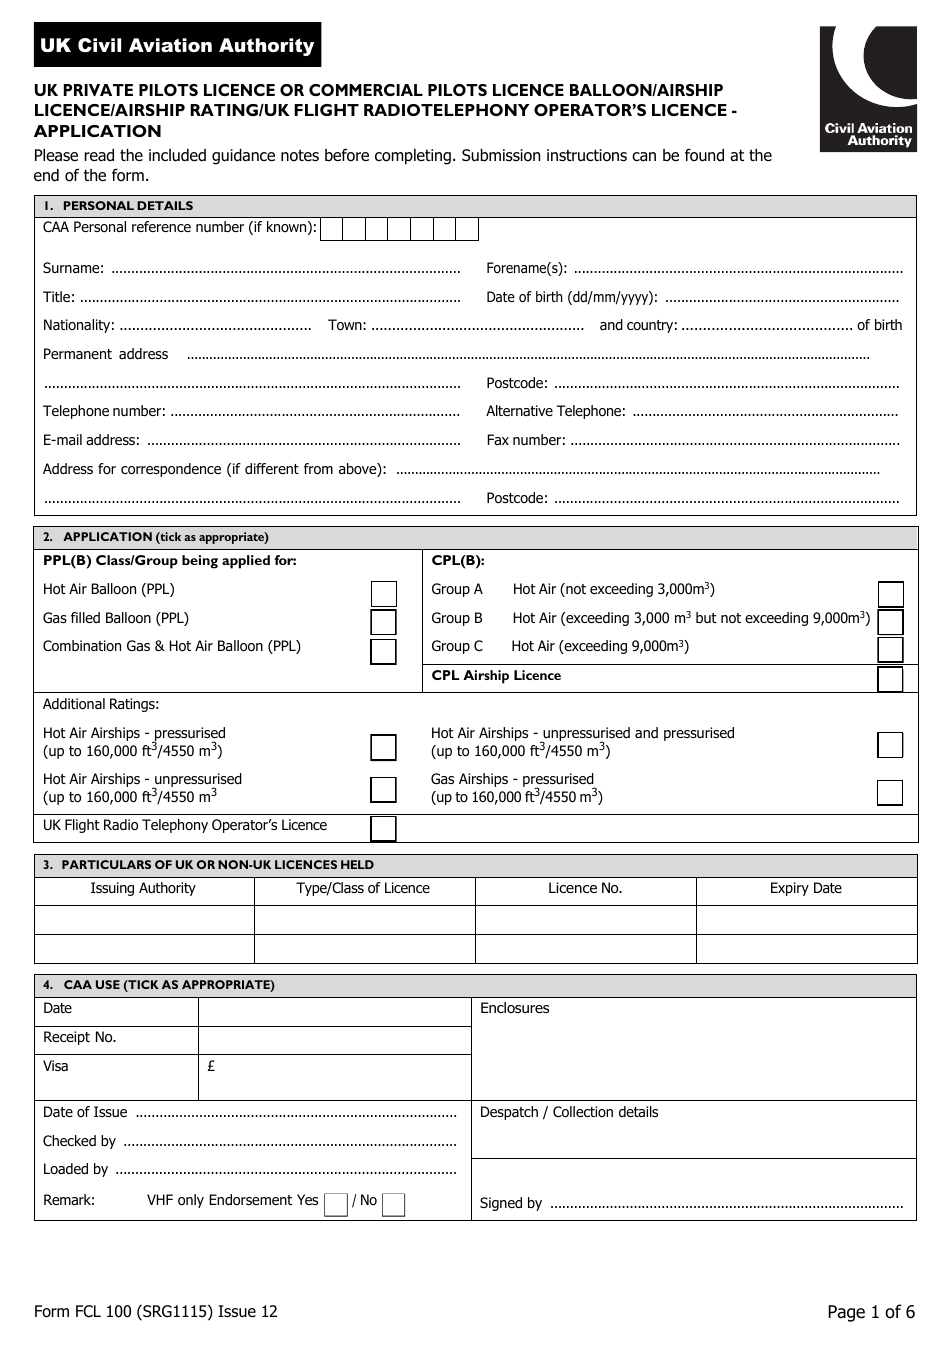 Form FCL100 (SRG1115) UK Private Pilots Licence or Commercial Pilots Licence Balloon / Airship Licence / Airship Rating / UK Flight Radiotelephony Operators Licence - Application - United Kingdom, Page 1